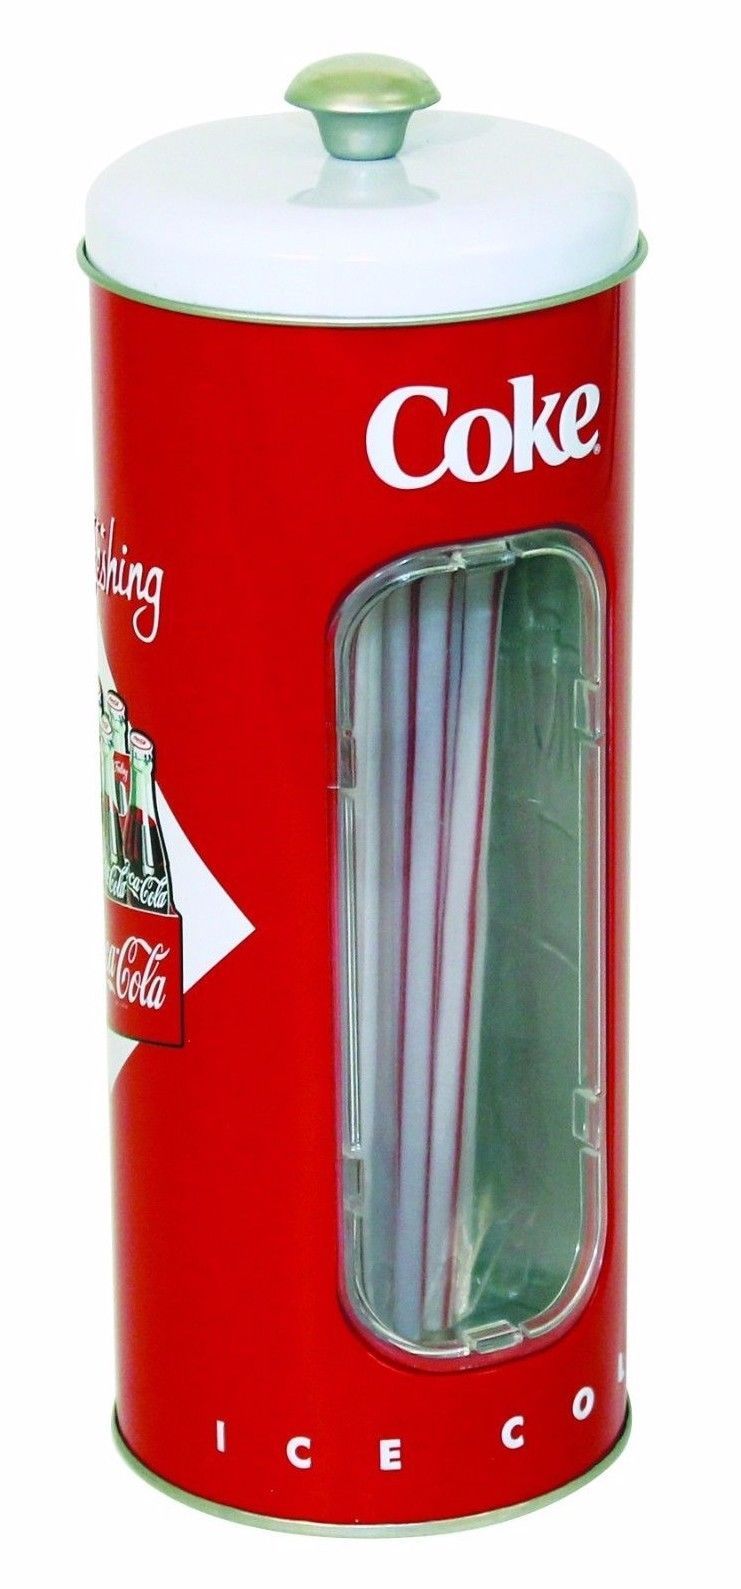 Primary image for Coca-Cola Straw Dispenser Metal Red Ombre Drink Coca-Cola in Bottles